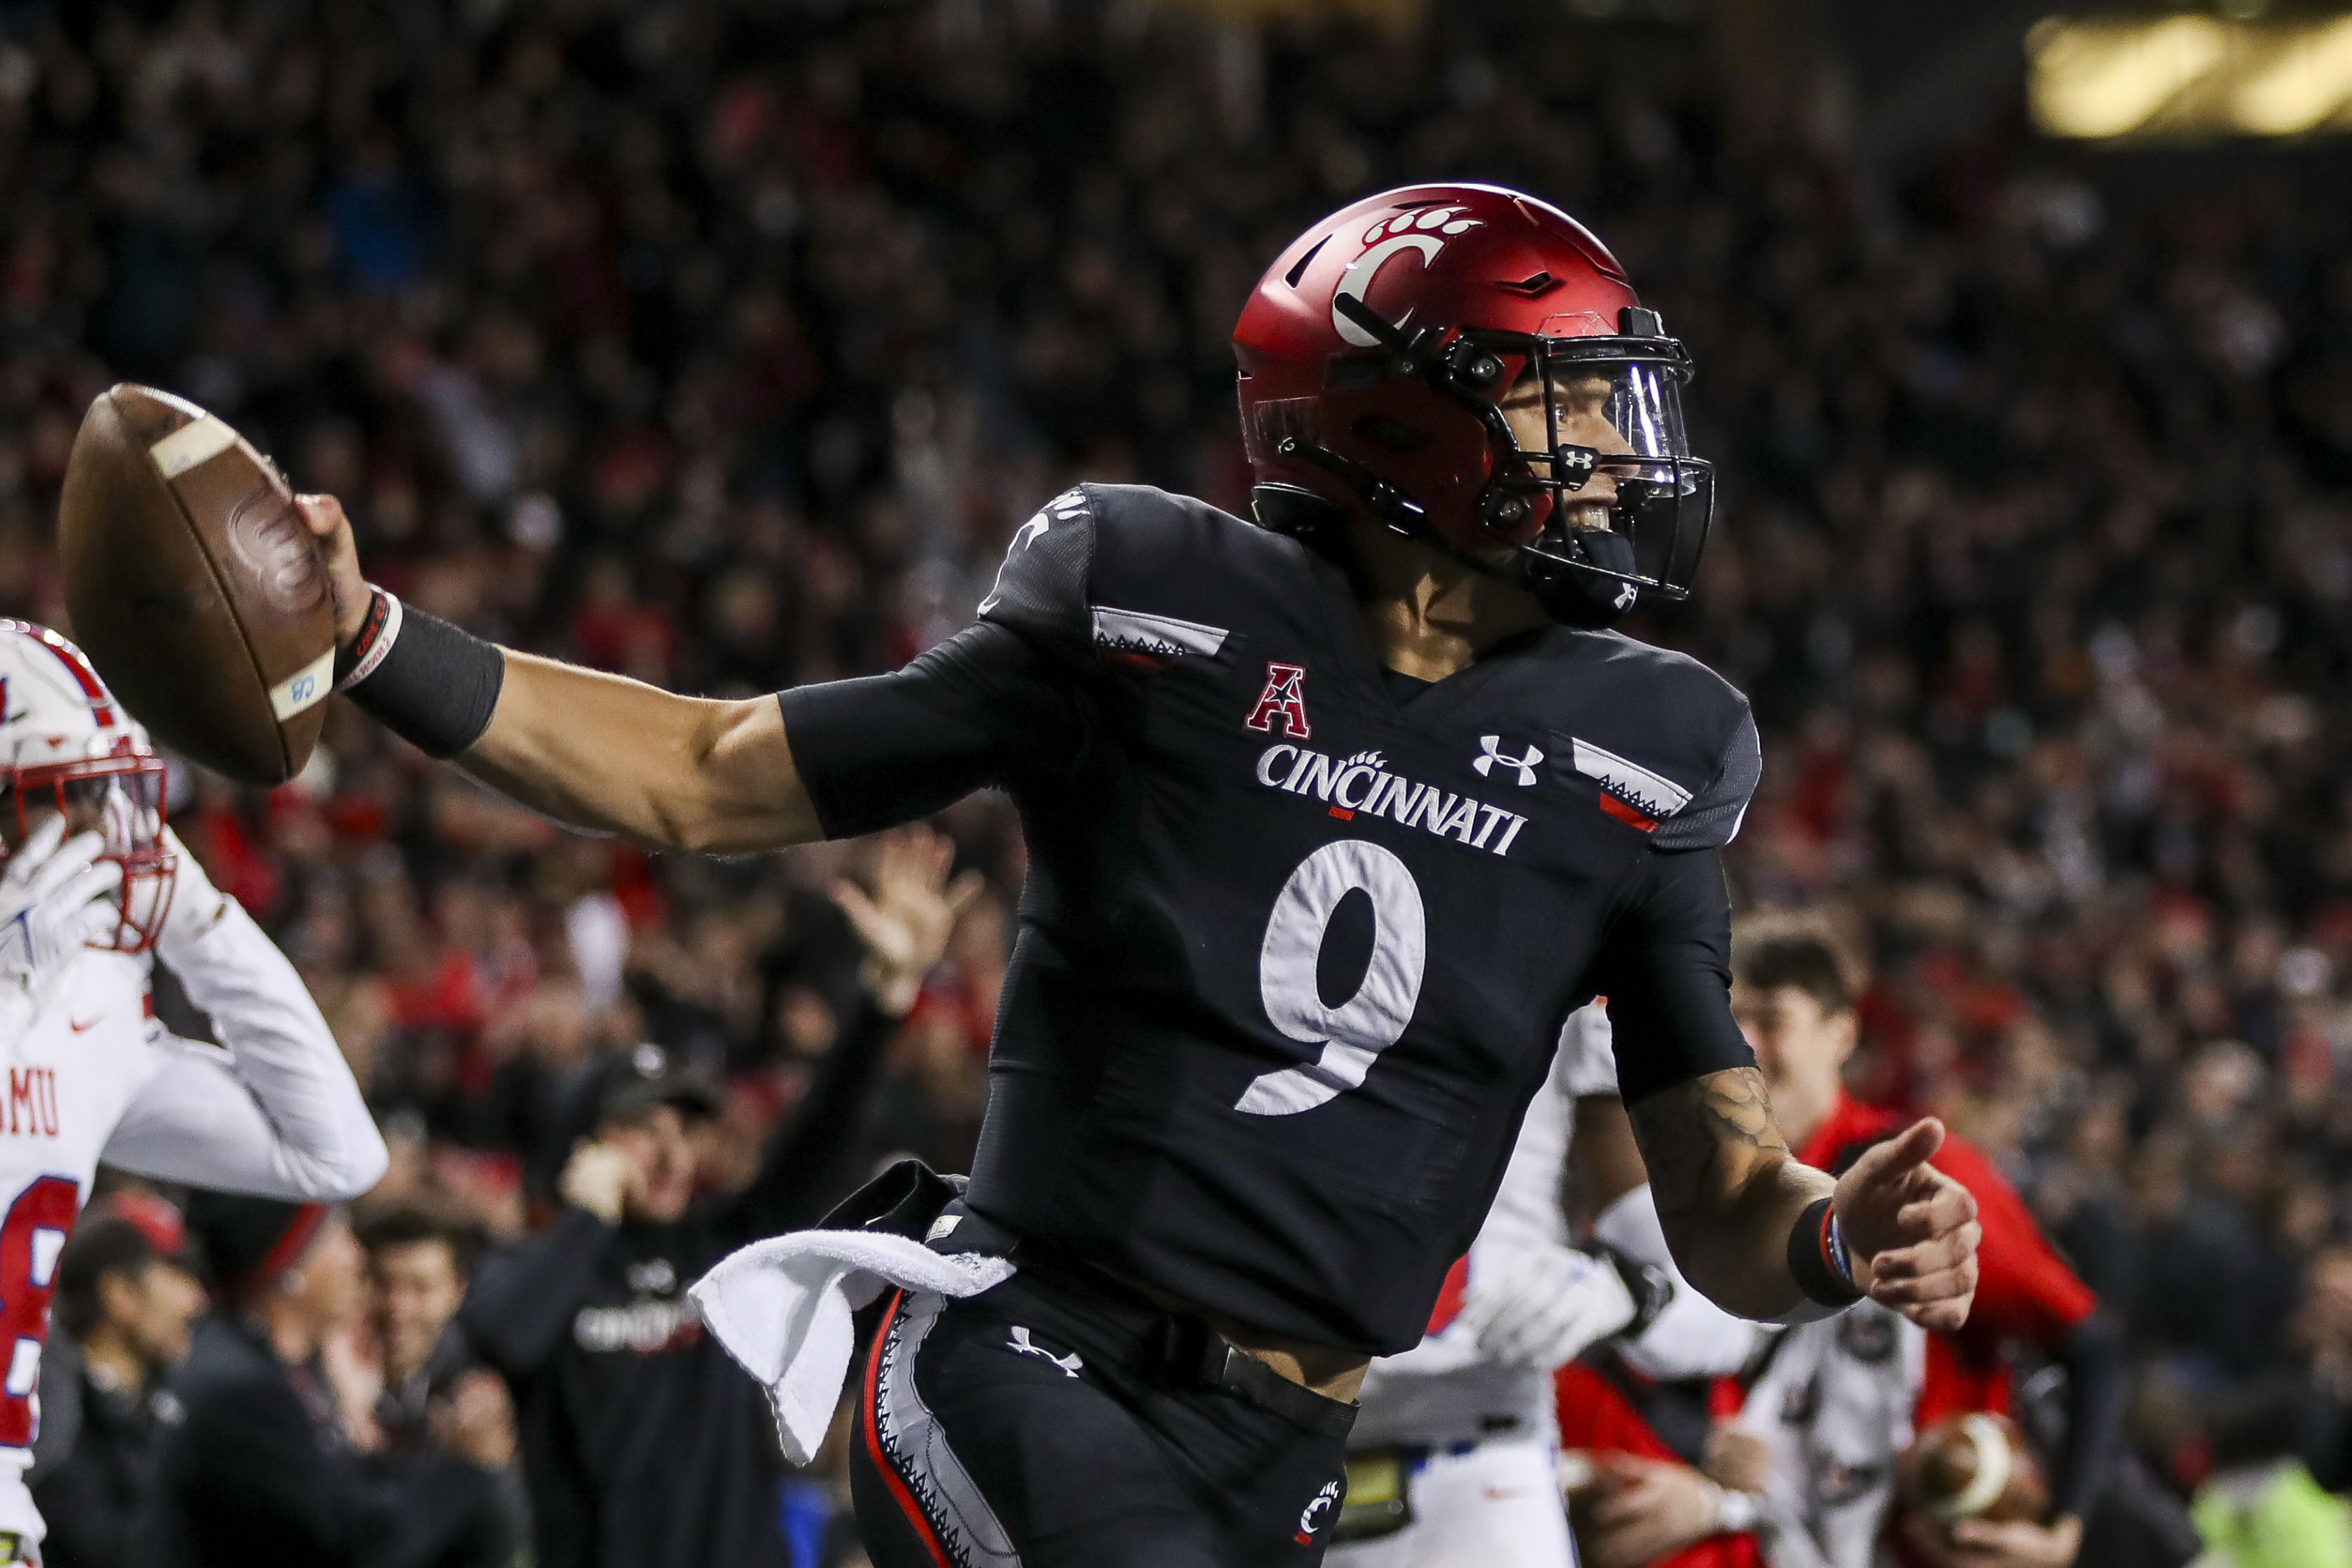 2022 NFL Two-Round Mock Draft: QB Desmond Ridder goes to the